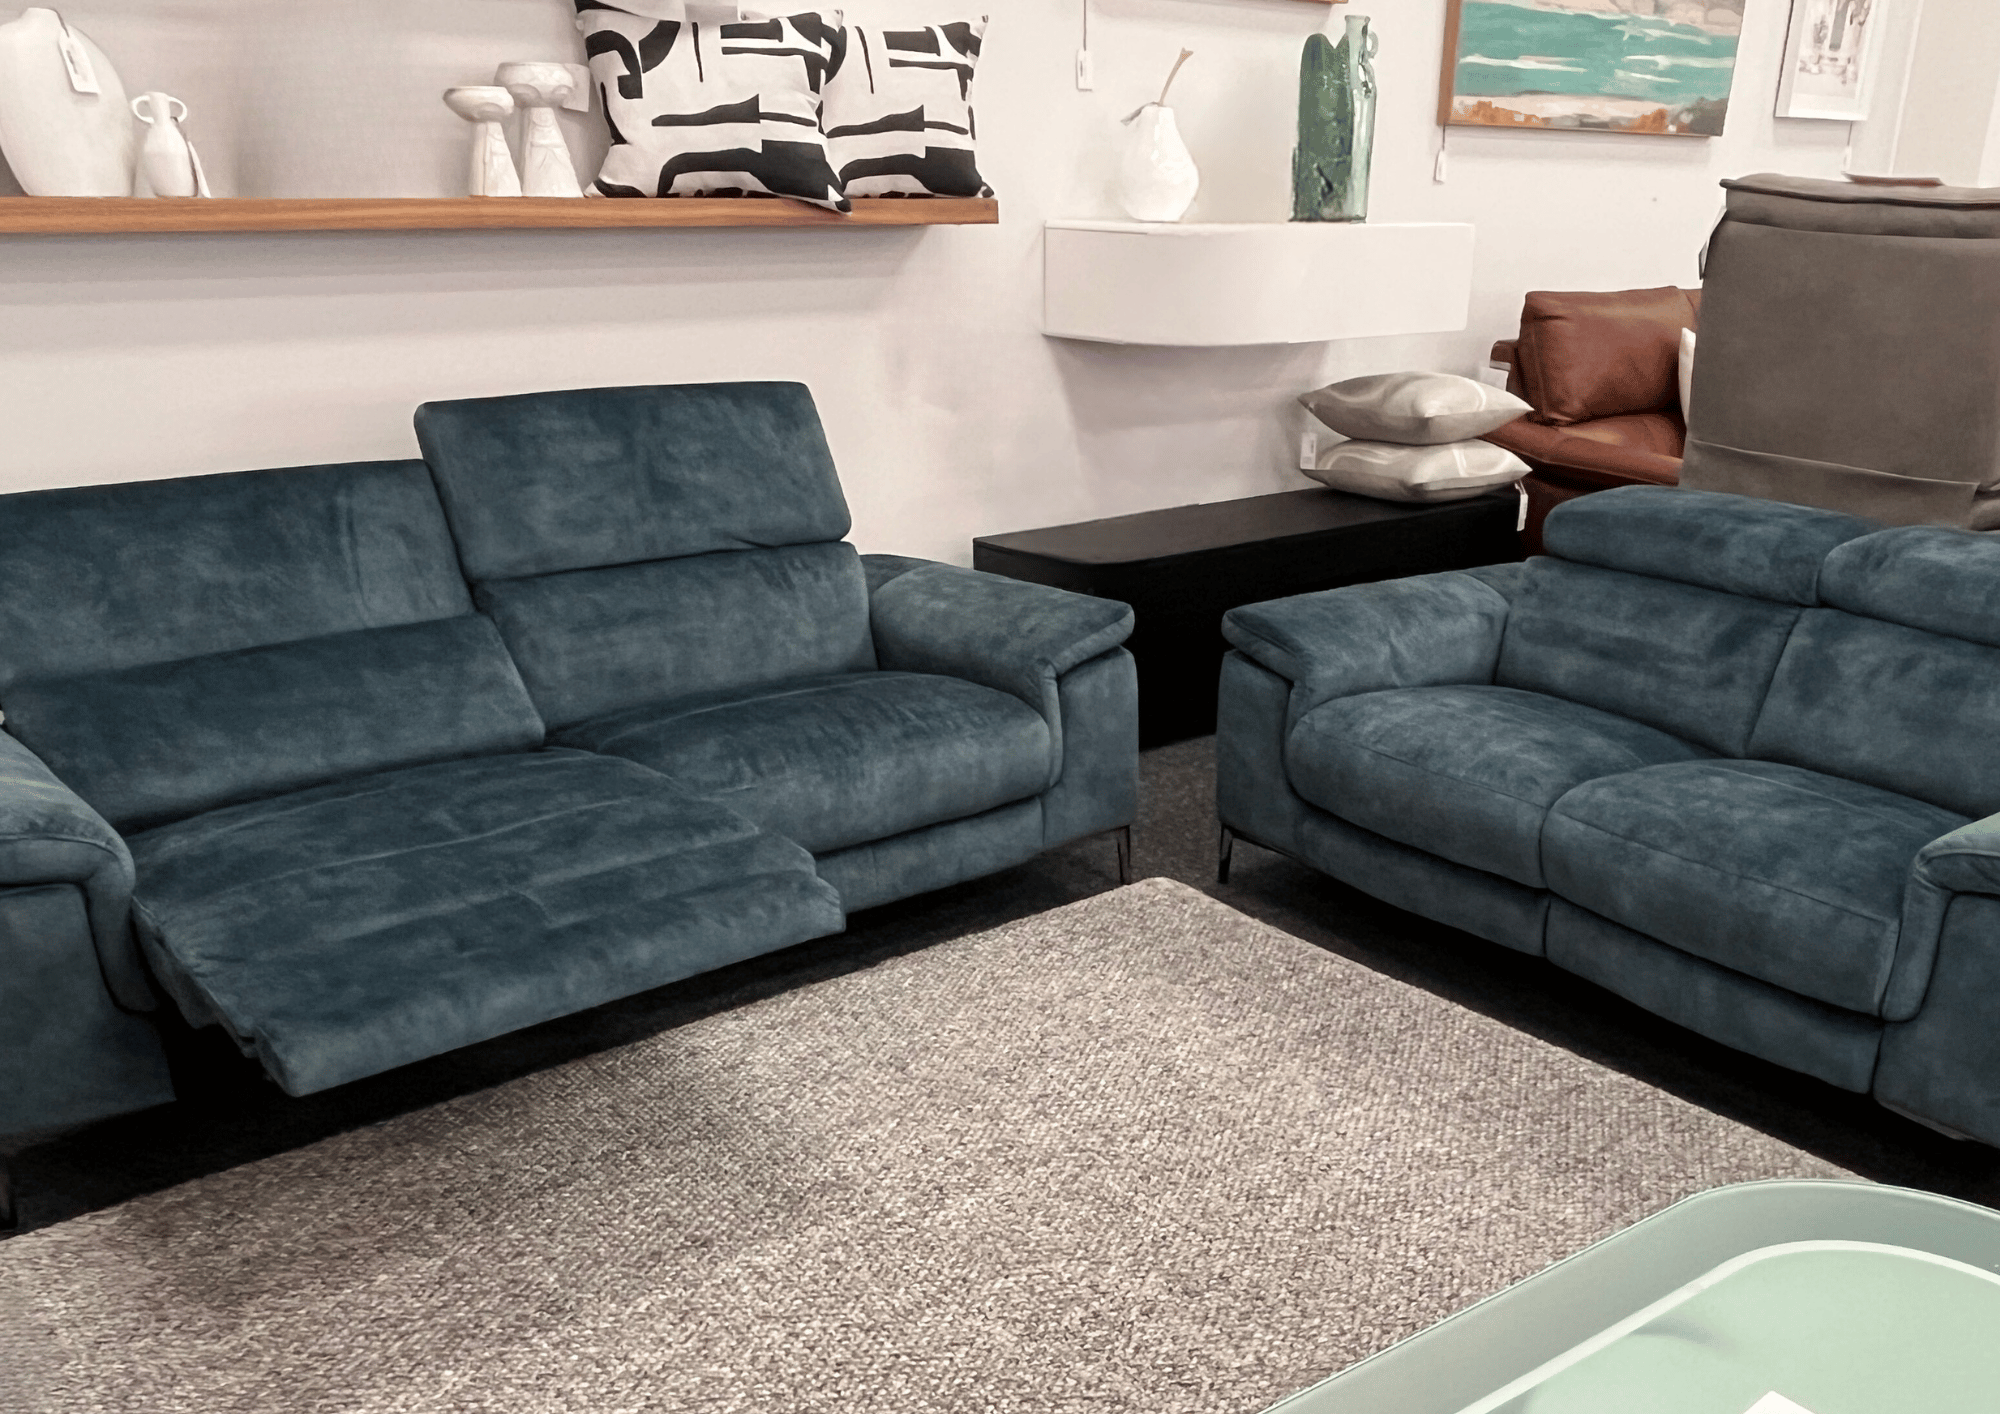 Marley Indigo Velvet Lounge Suite with electric adjustable headrests and electric recliners.